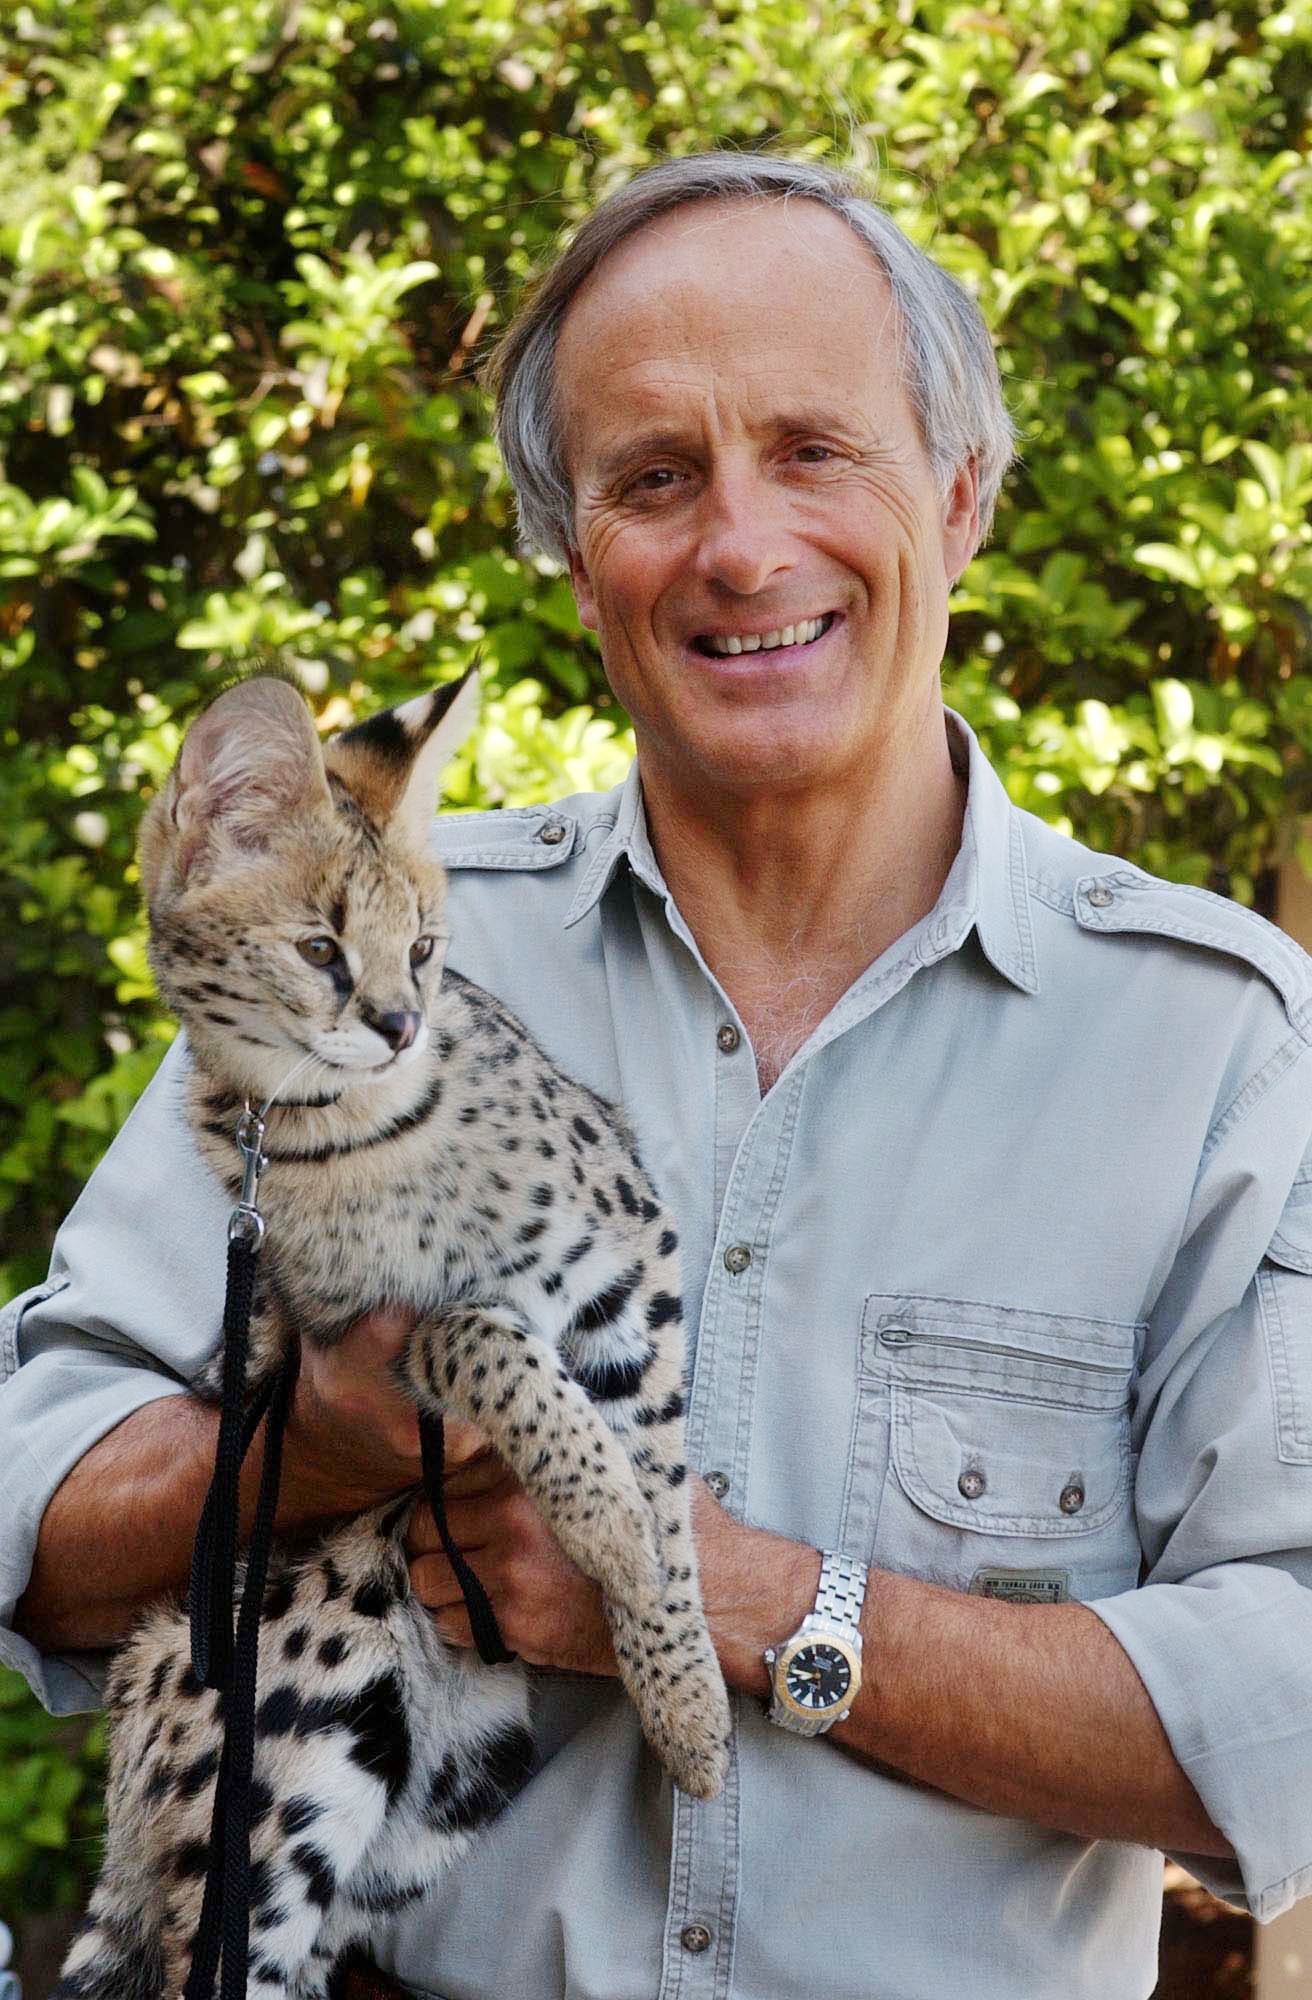 Jack Hanna, director emeritus of the Columbus Zoo and Aquarium, holds a serval cat. Credit: Courtesy of MCT